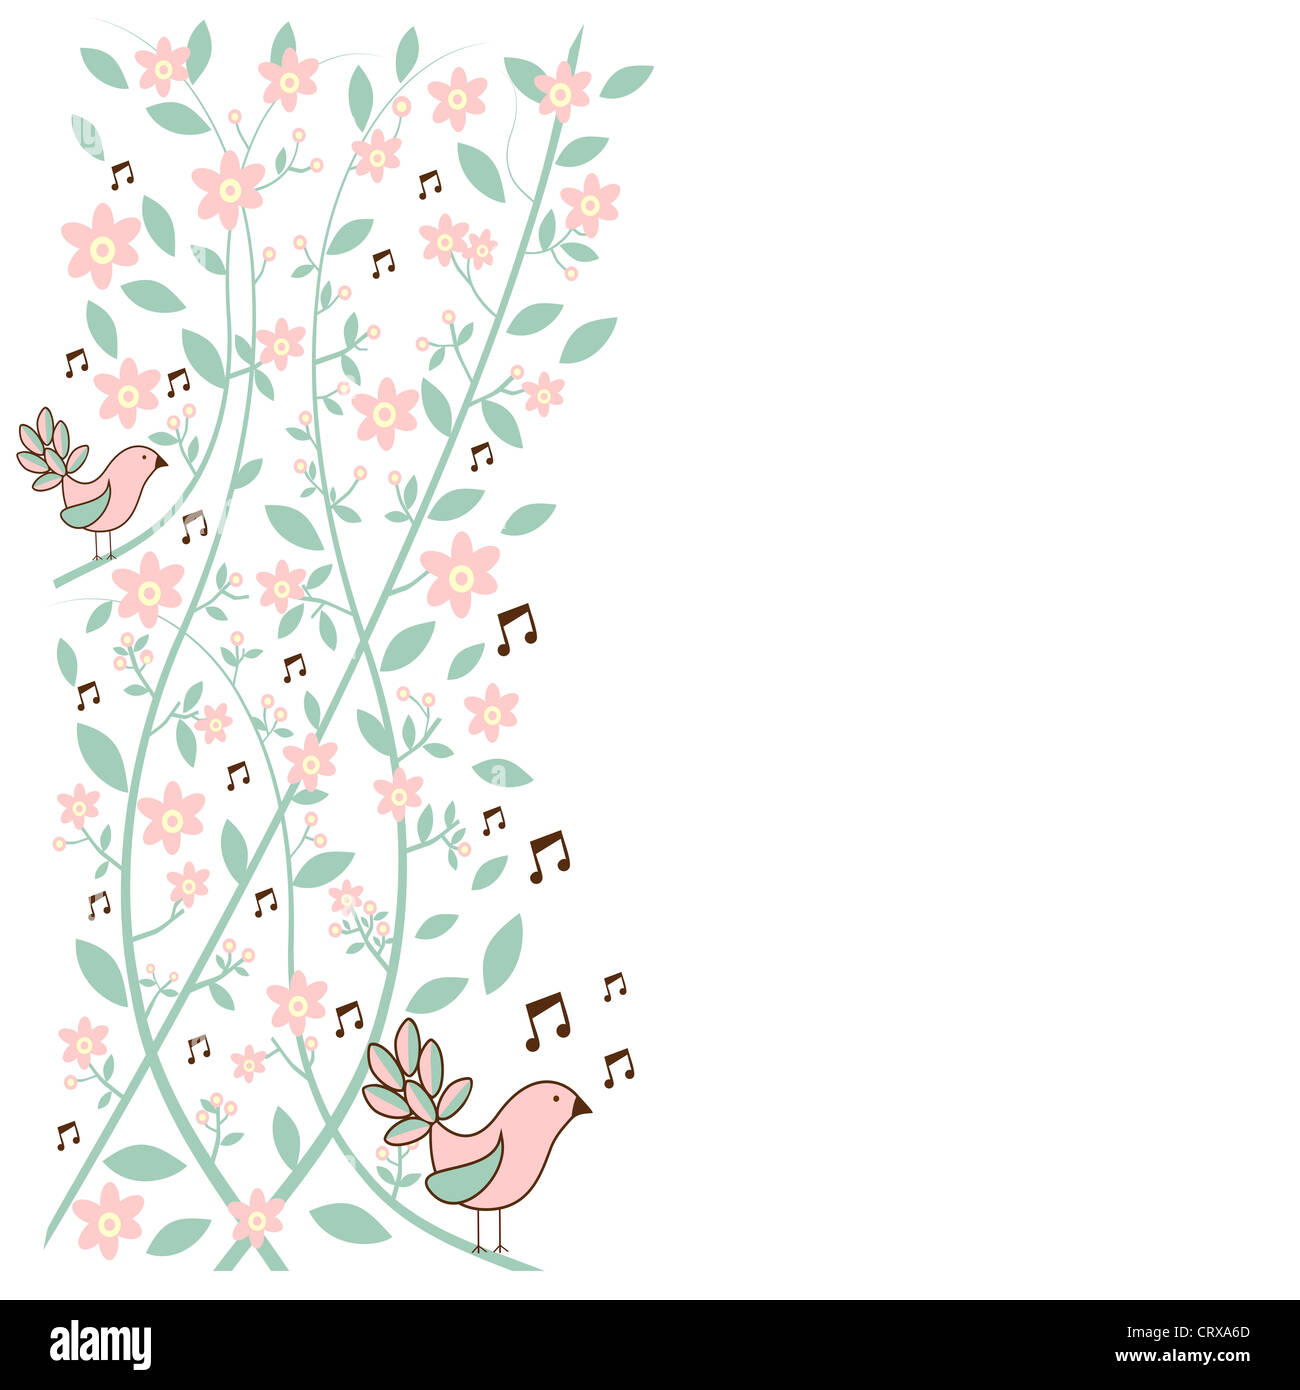 Fresh communication concept: musical birds over floral background. Vector file layered for easy manipulation and custom coloring. Stock Photo